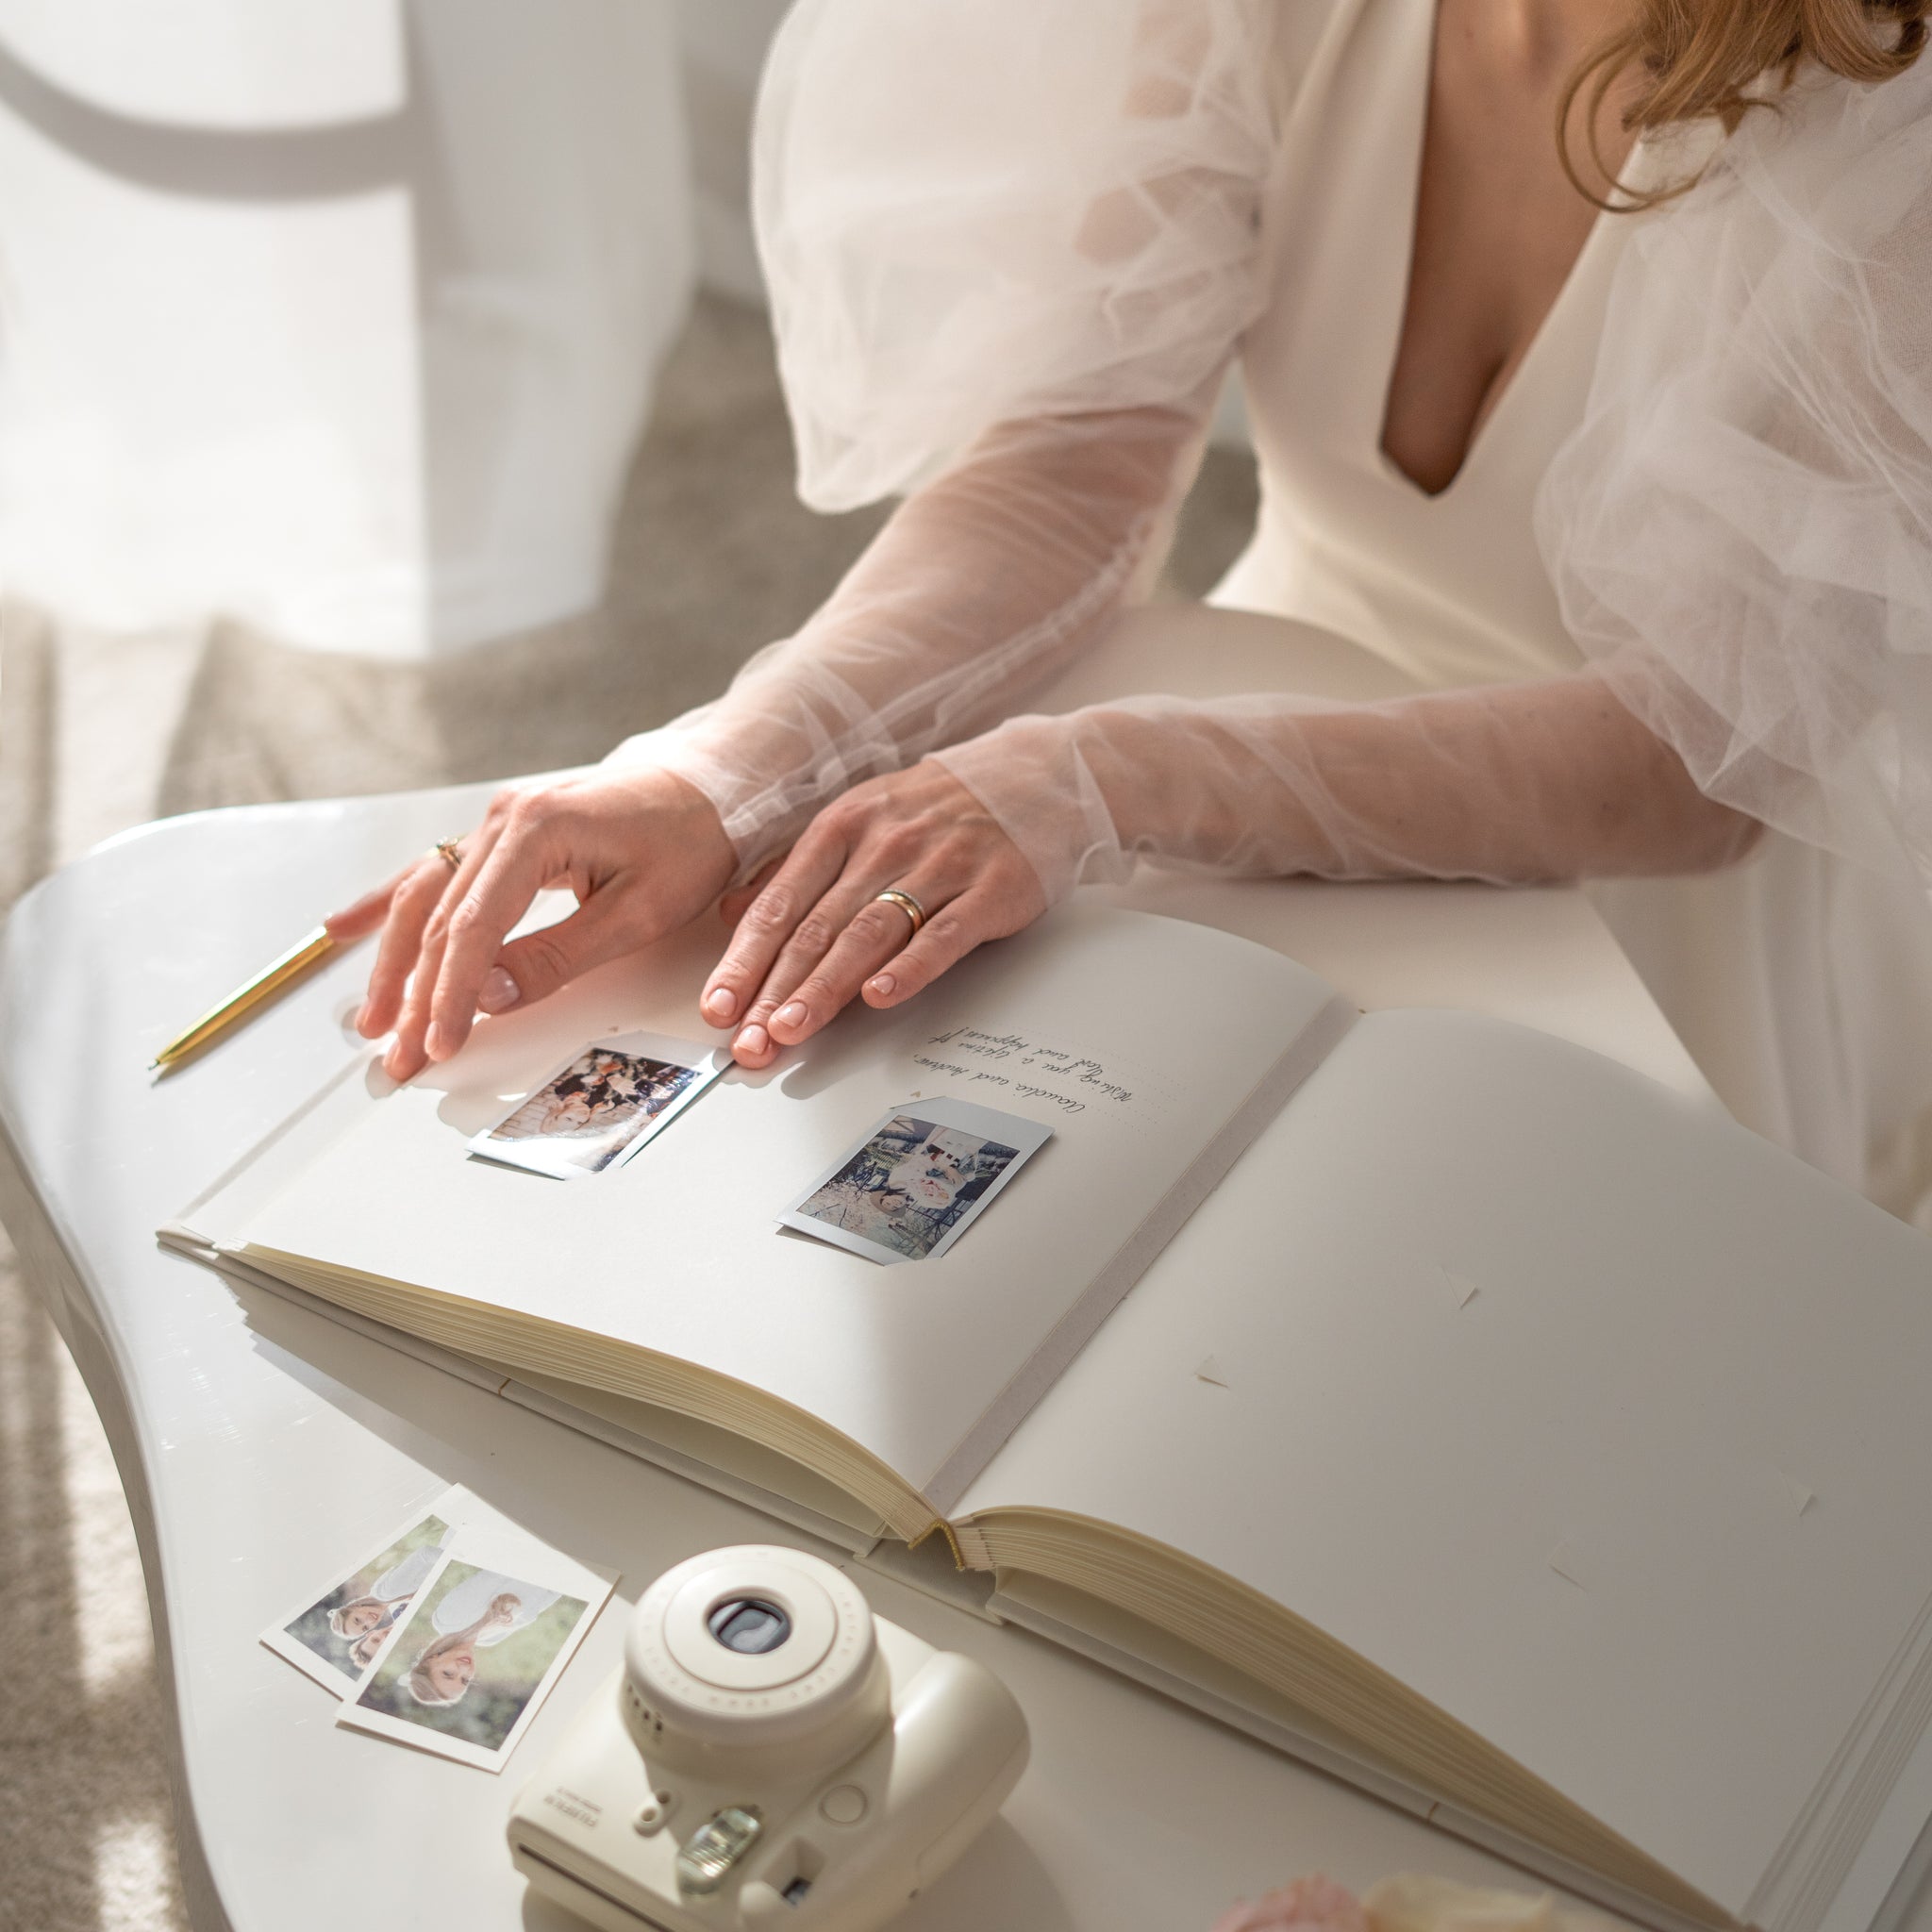 Ivory + White Velour | Guest Book